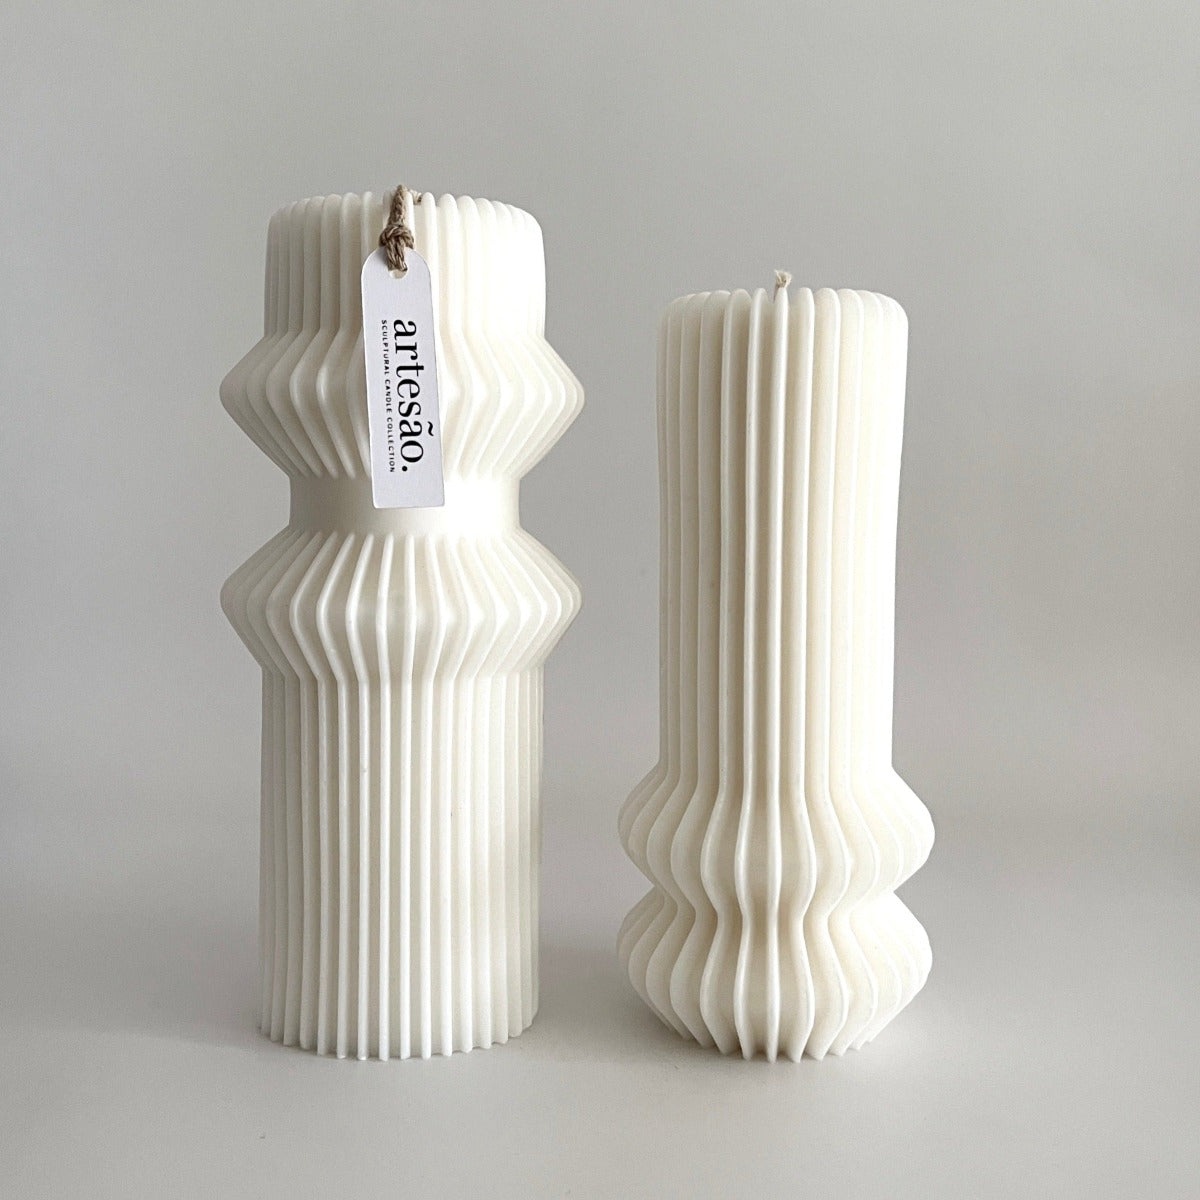 FREYJA Nordic ribbed candle made by Artesao Candles. Luxury home decor candle